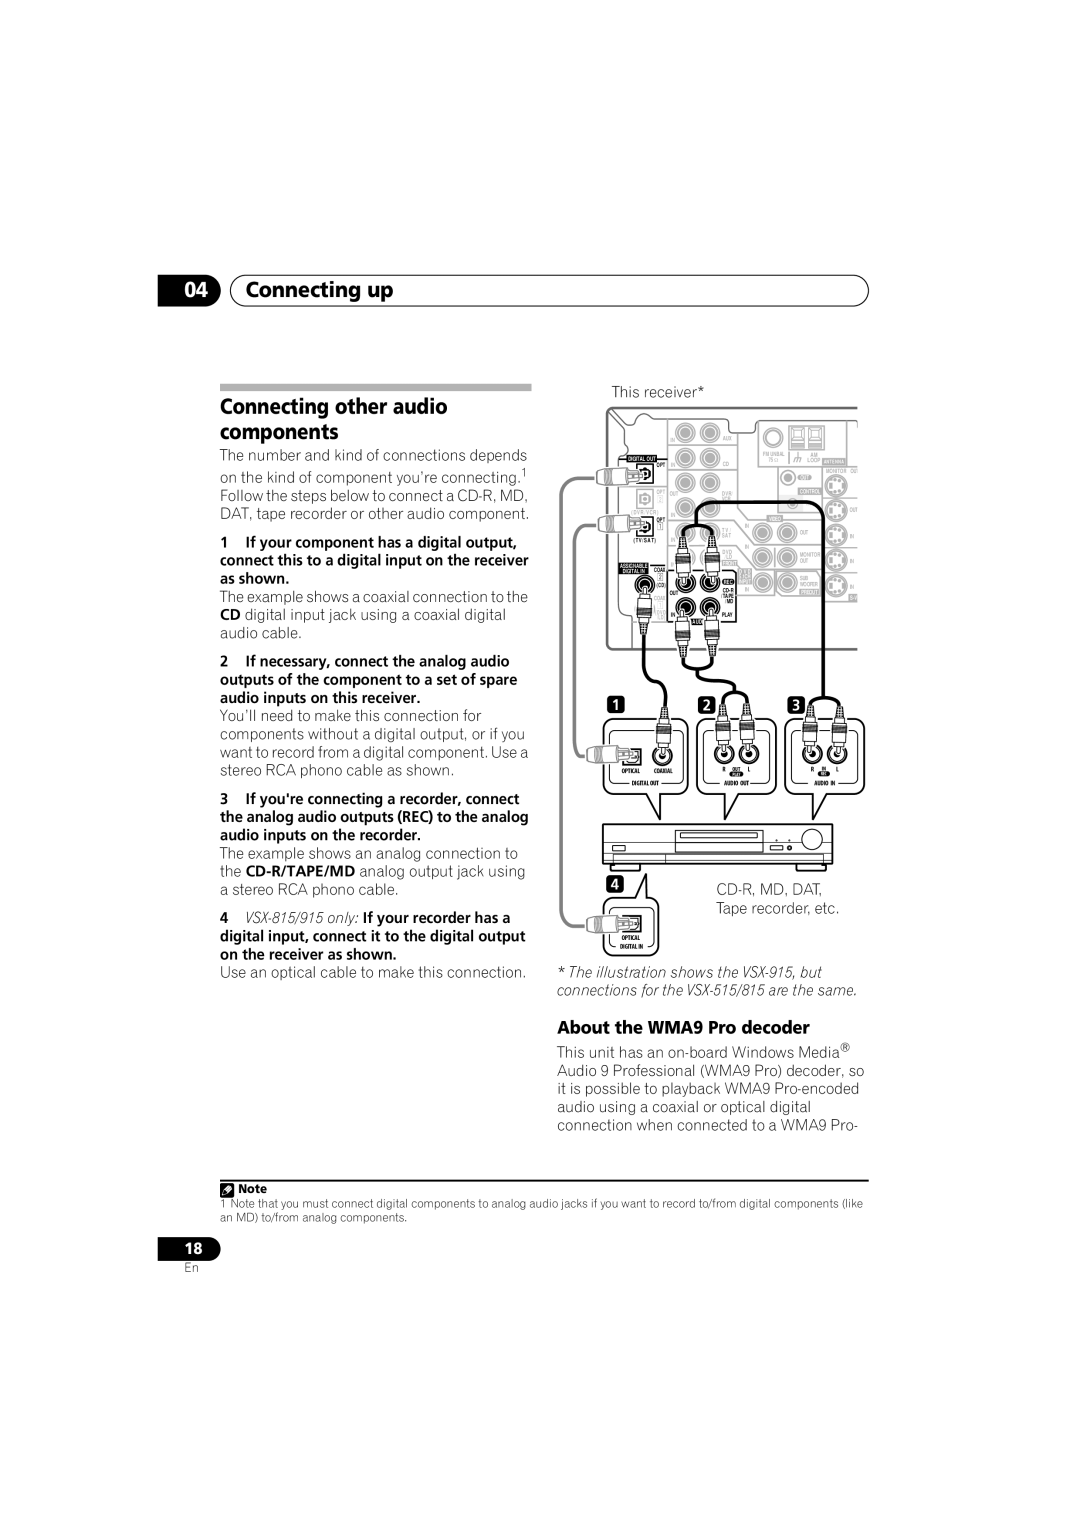 Pioneer VSX-915-S/-K, VSX-815-S/-K manual 04Connecting up, Connecting other audio components, About the WMA9 Pro decoder 